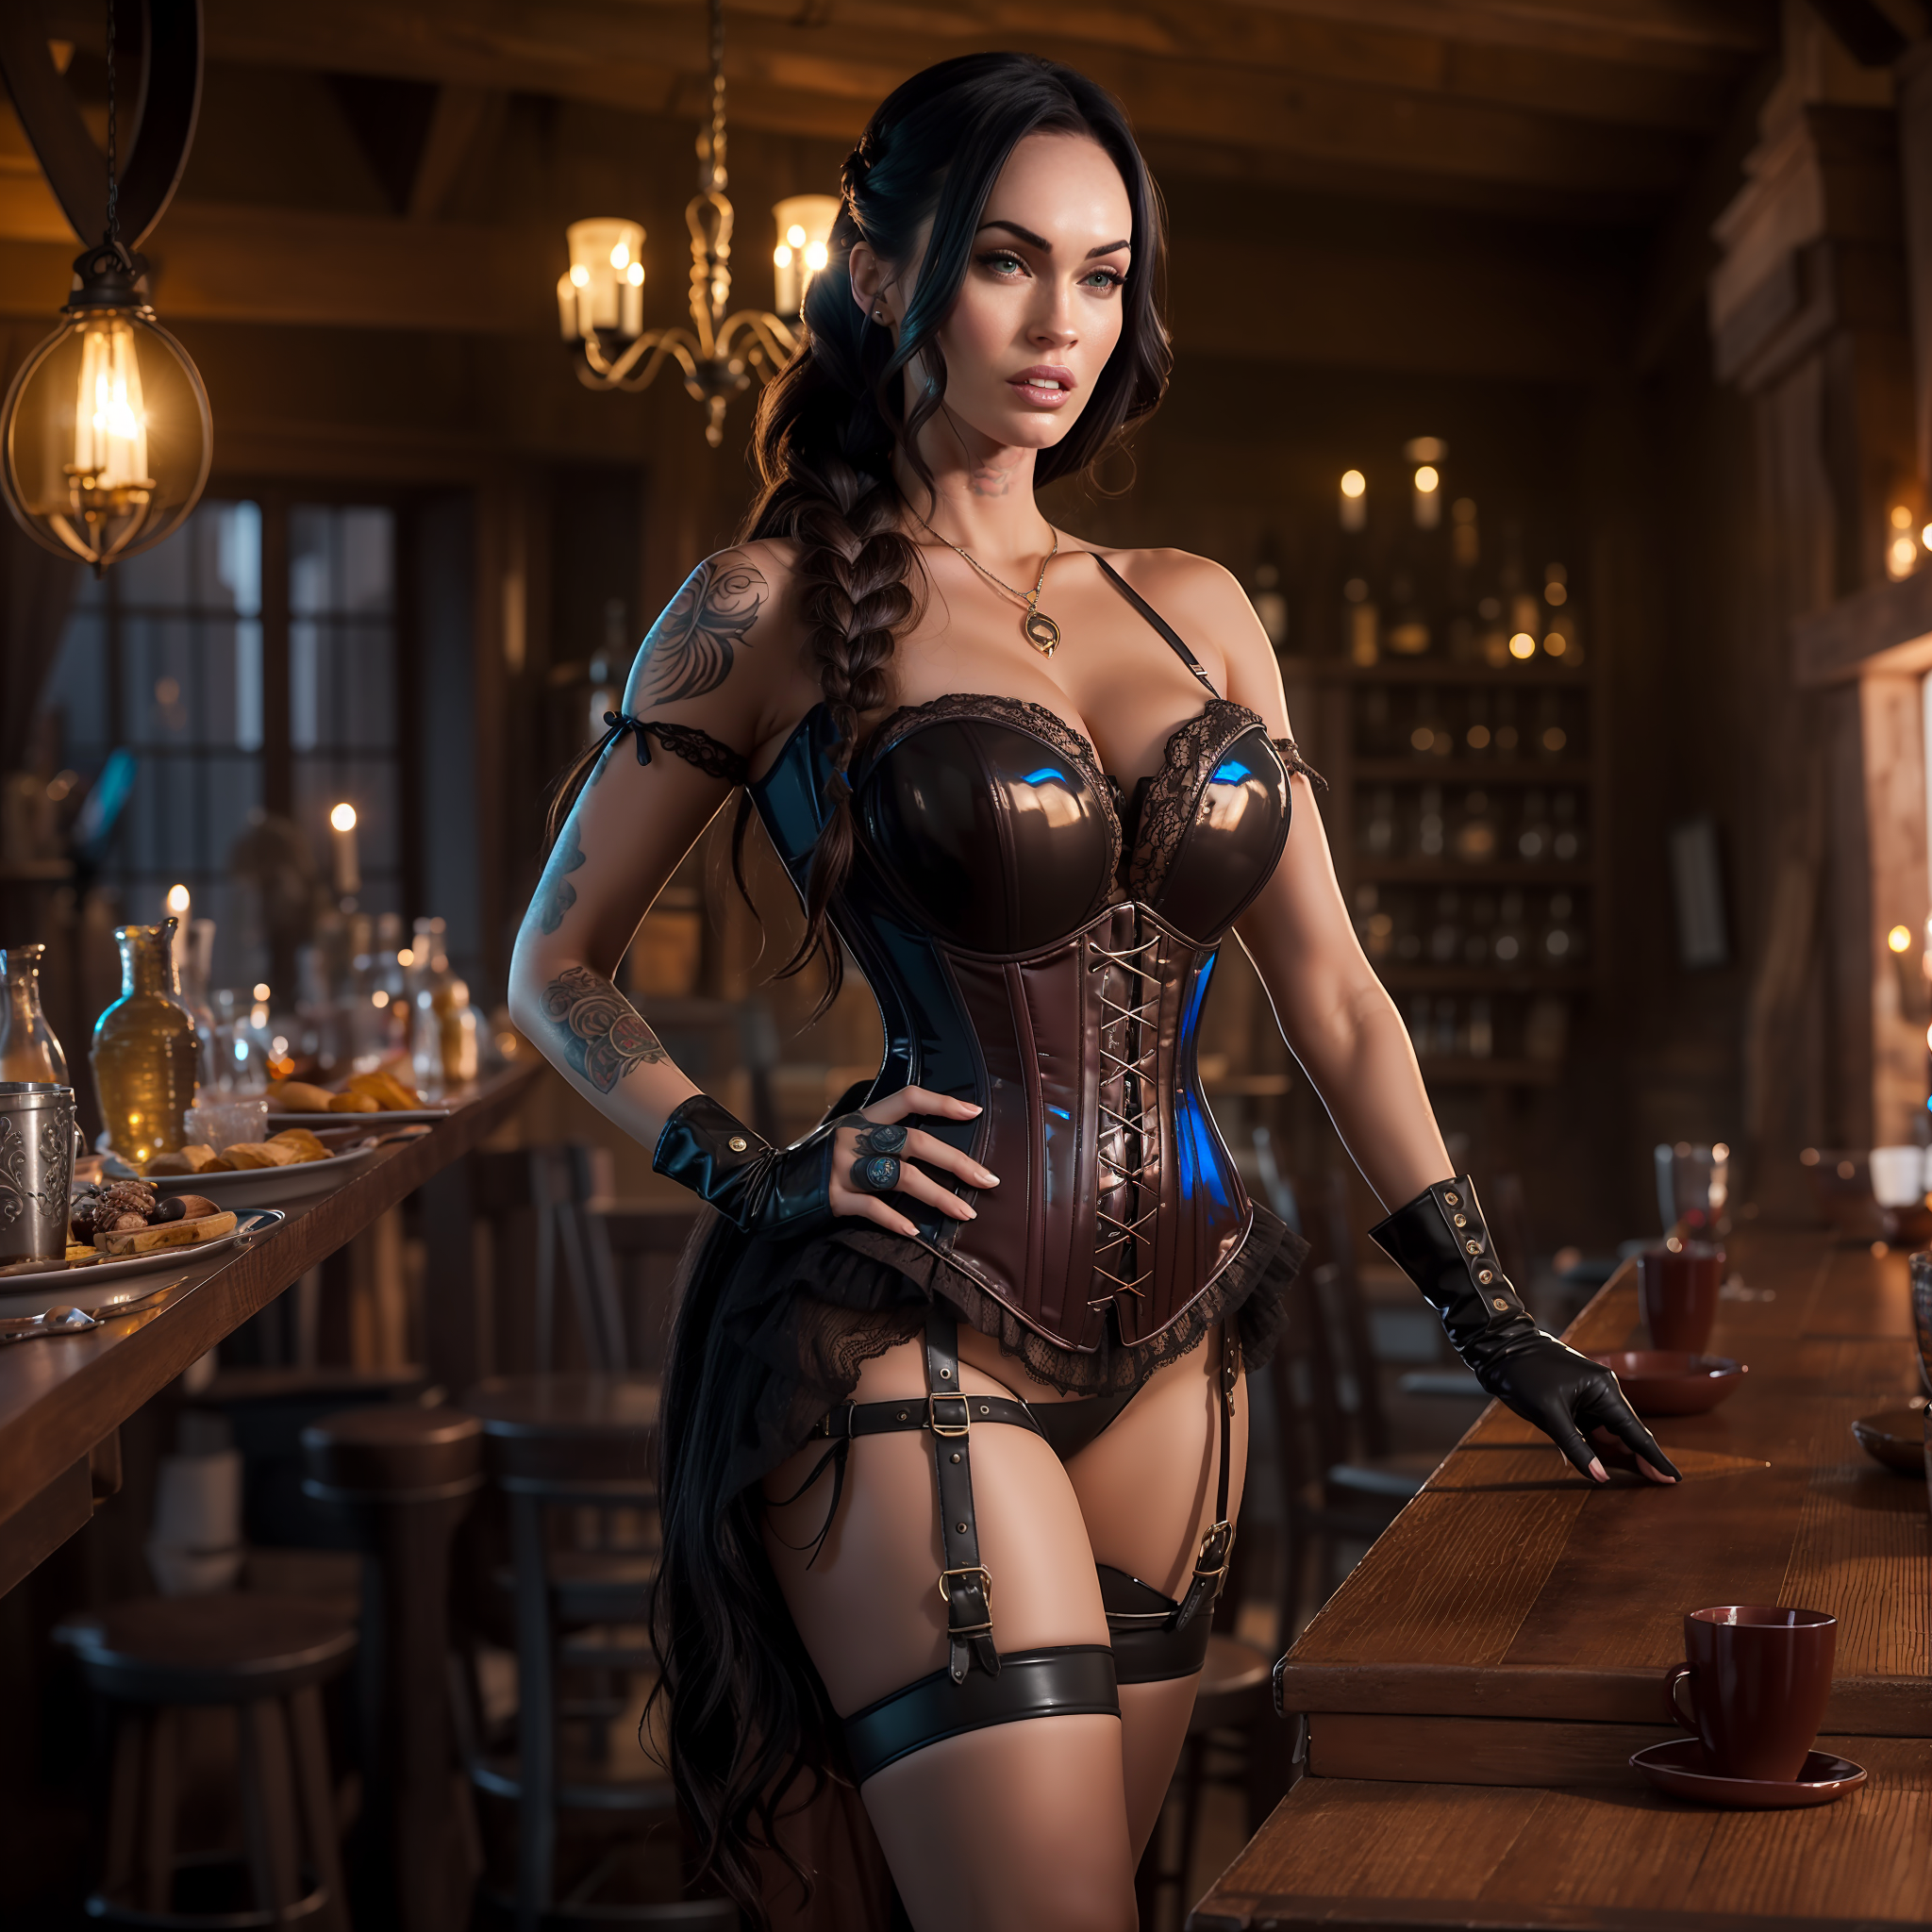 General 2048x2048 Megan Fox AI art hands on hips cleavage gloves drink bar chandeliers standing portrait display digital art necklace big boobs blurred blurry background corset cup